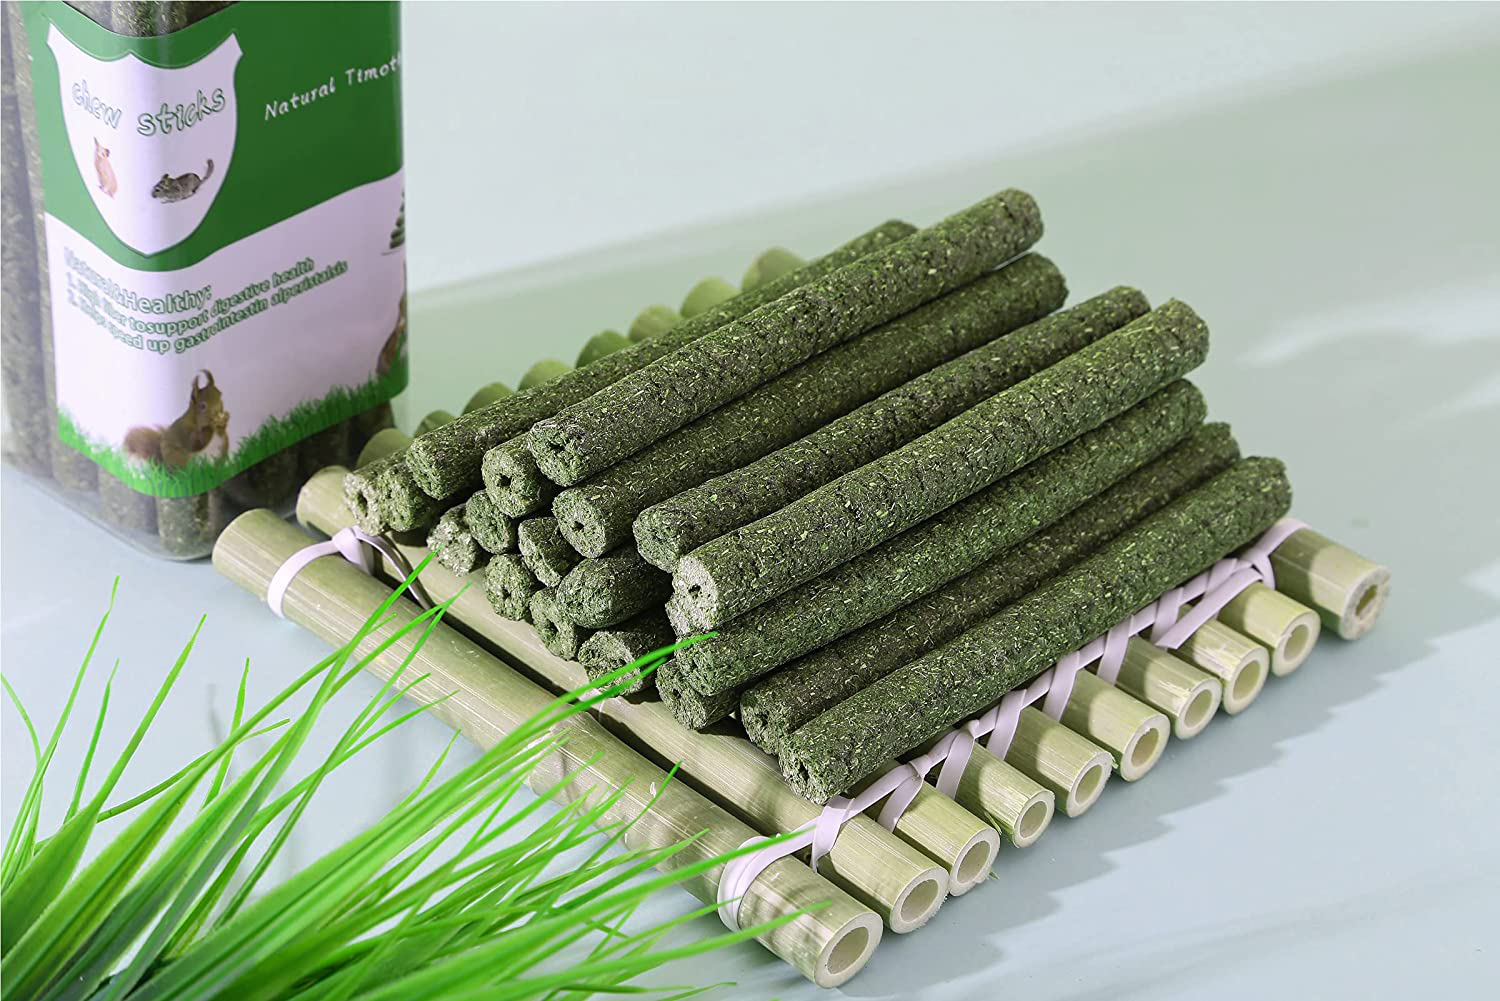 Natural Timothy Hay Sticks, Natural Apple Sticks, Natural Grass Cake, Timothy Molar Rod for Small Animals, Rabbits Chinchilla Hamsters Guinea Pigs Gerbils Groundhog Squirrels